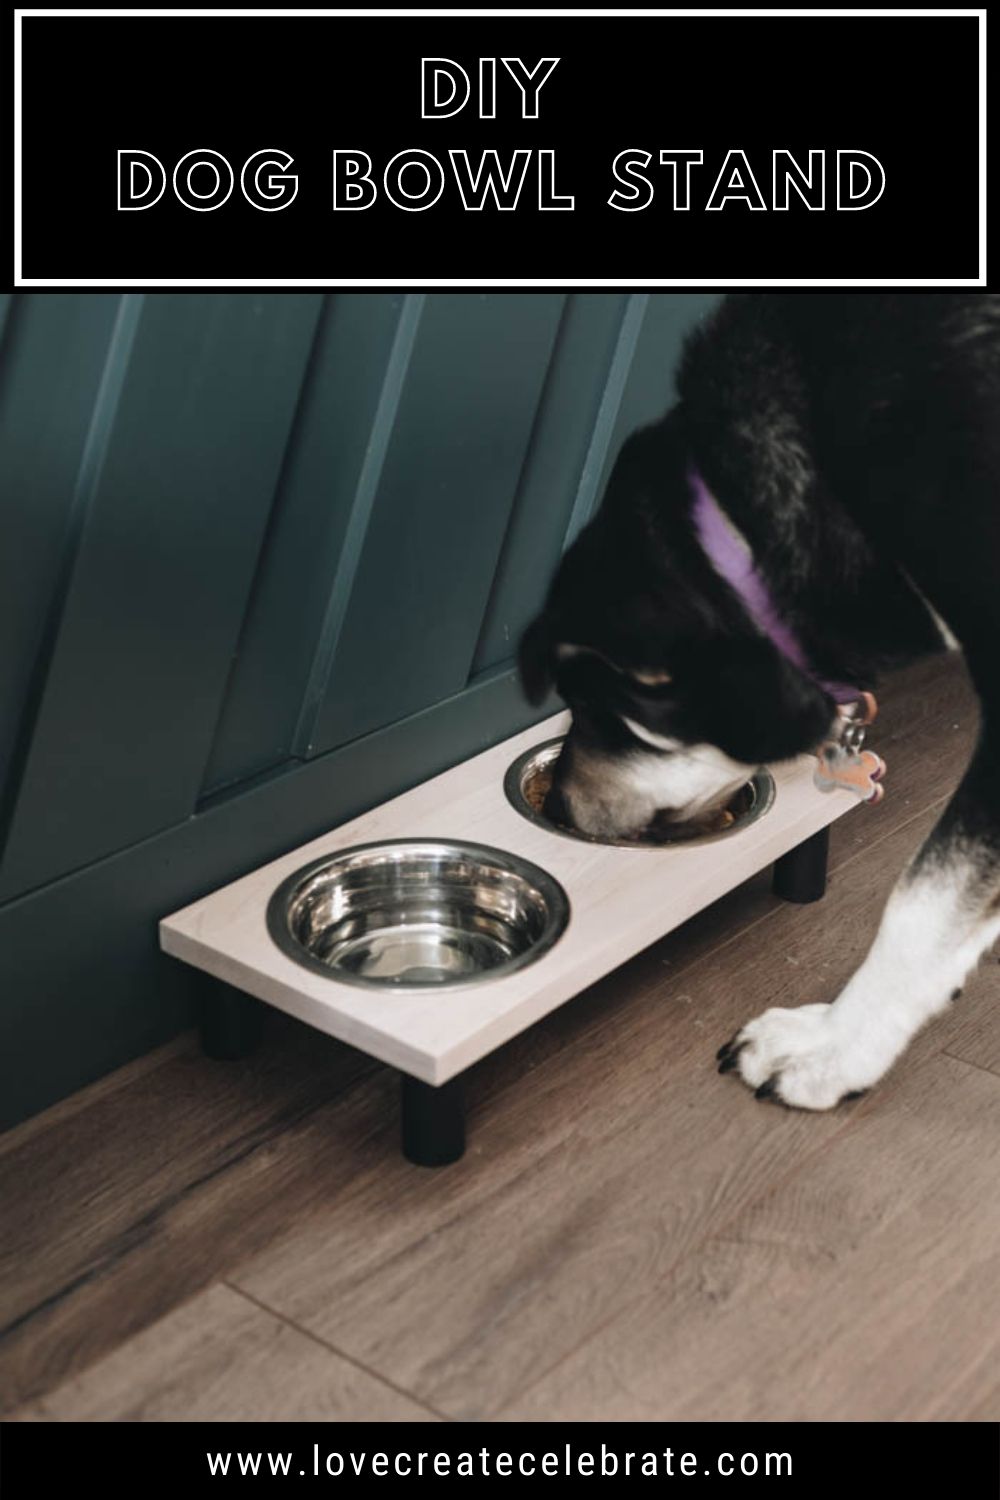 dog eating from DIY dog bowl stand with text overlay "DIY Dog Bowl Stand"